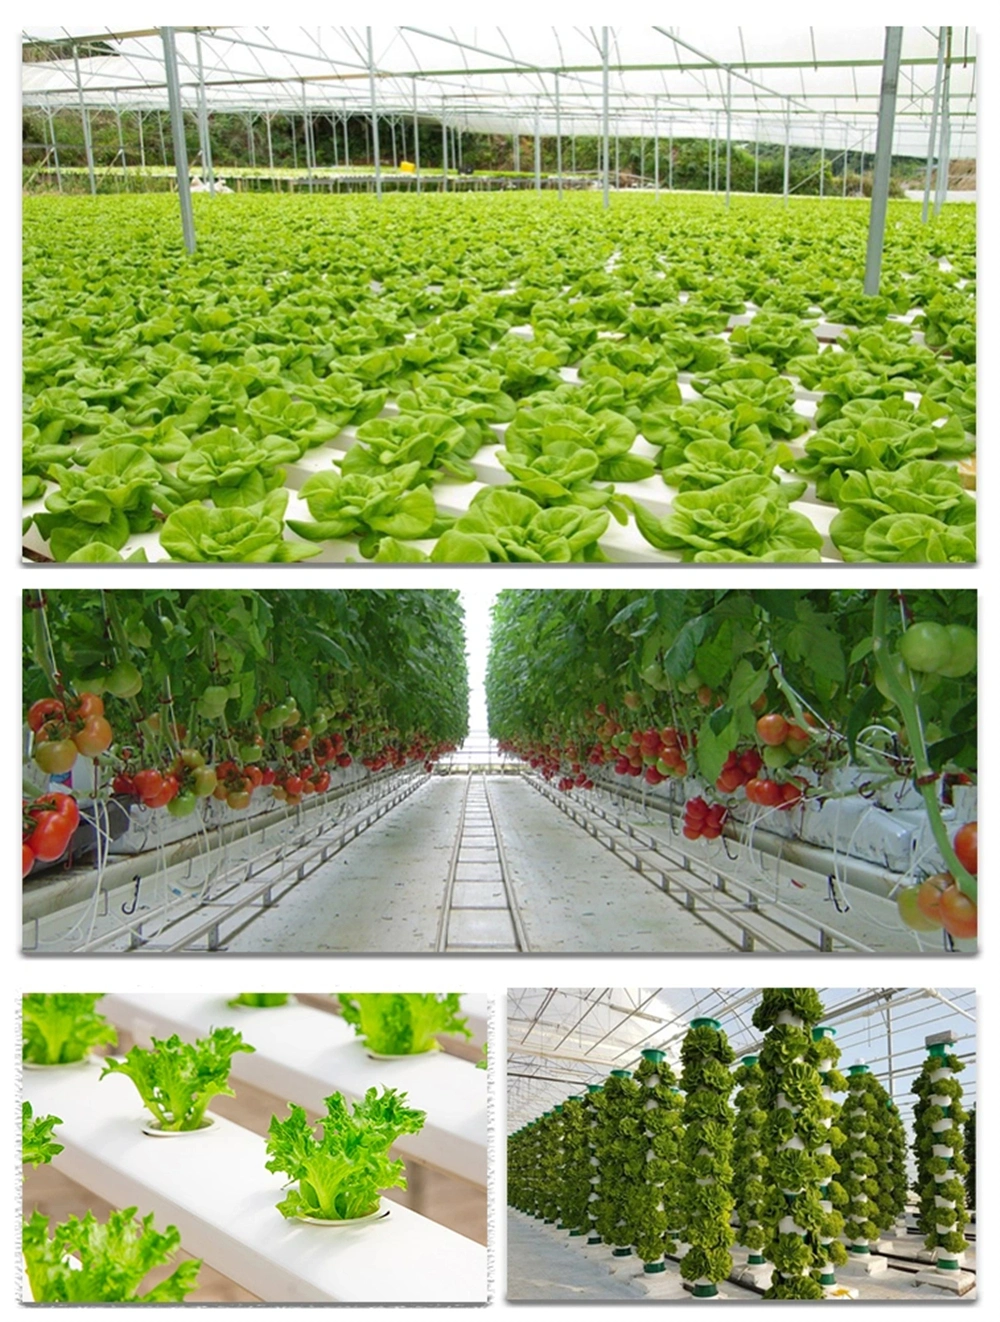 UV Resistant Multi-Span Agricultural/Commercial Plastic Film Grow Tents/Greenhouse for Vegetables/Flowers/Cucumber/Tomato